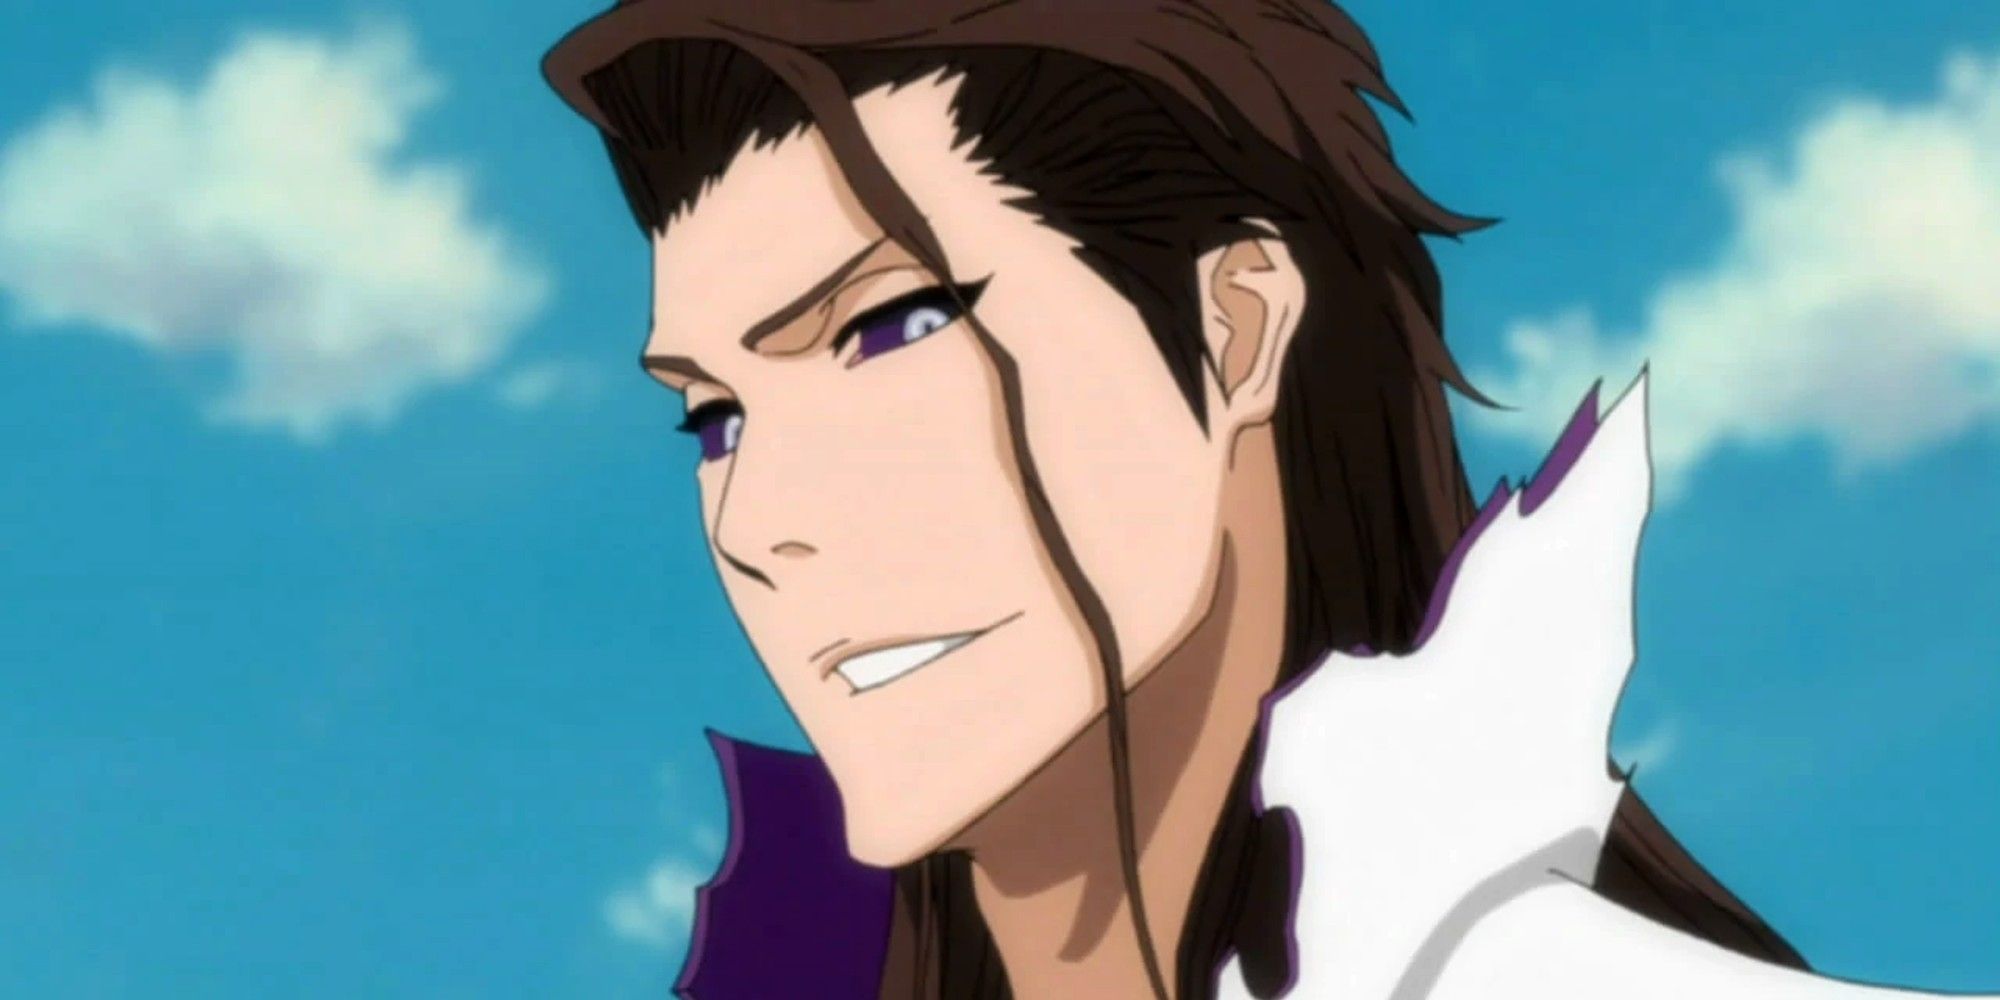 Aizen Sousuke looking at the camera with sharp eyes - Bleach